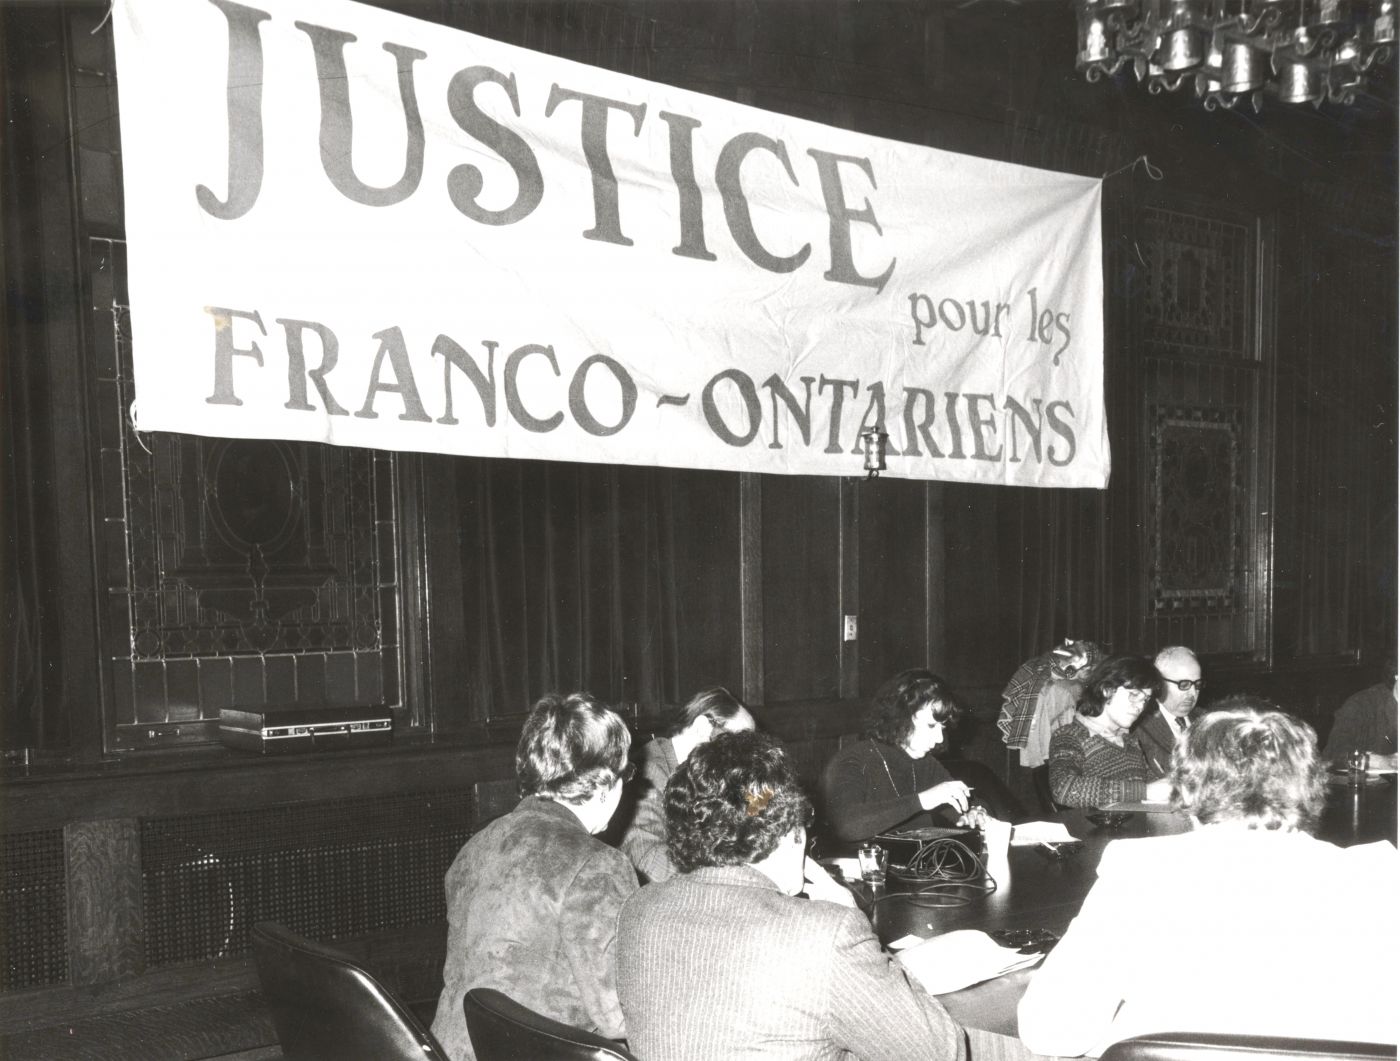 Black and white photograph of a meeting in a room with dark walls covered by a banner with the words “JUSTICE pour les FRANCO-ONTARIENS” (JUSTICE for FRANCO-ONTARIANS). A dozen men and women are seated at a conference table.